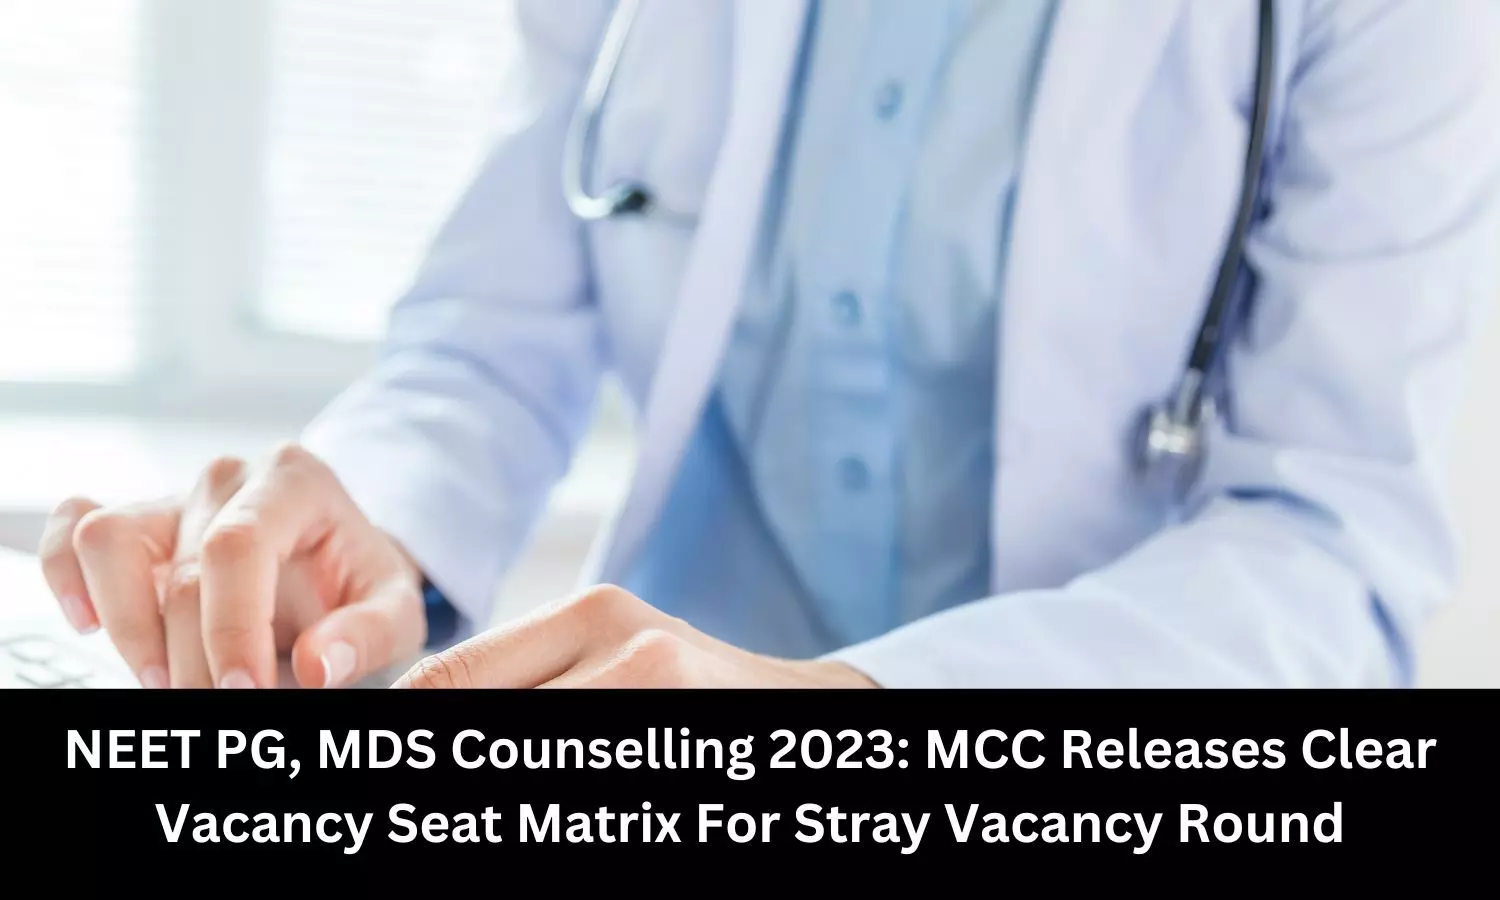 MCC releases clear vacancy seat Matrix for Stray Vacancy Round of NEET PG, MDS counselling